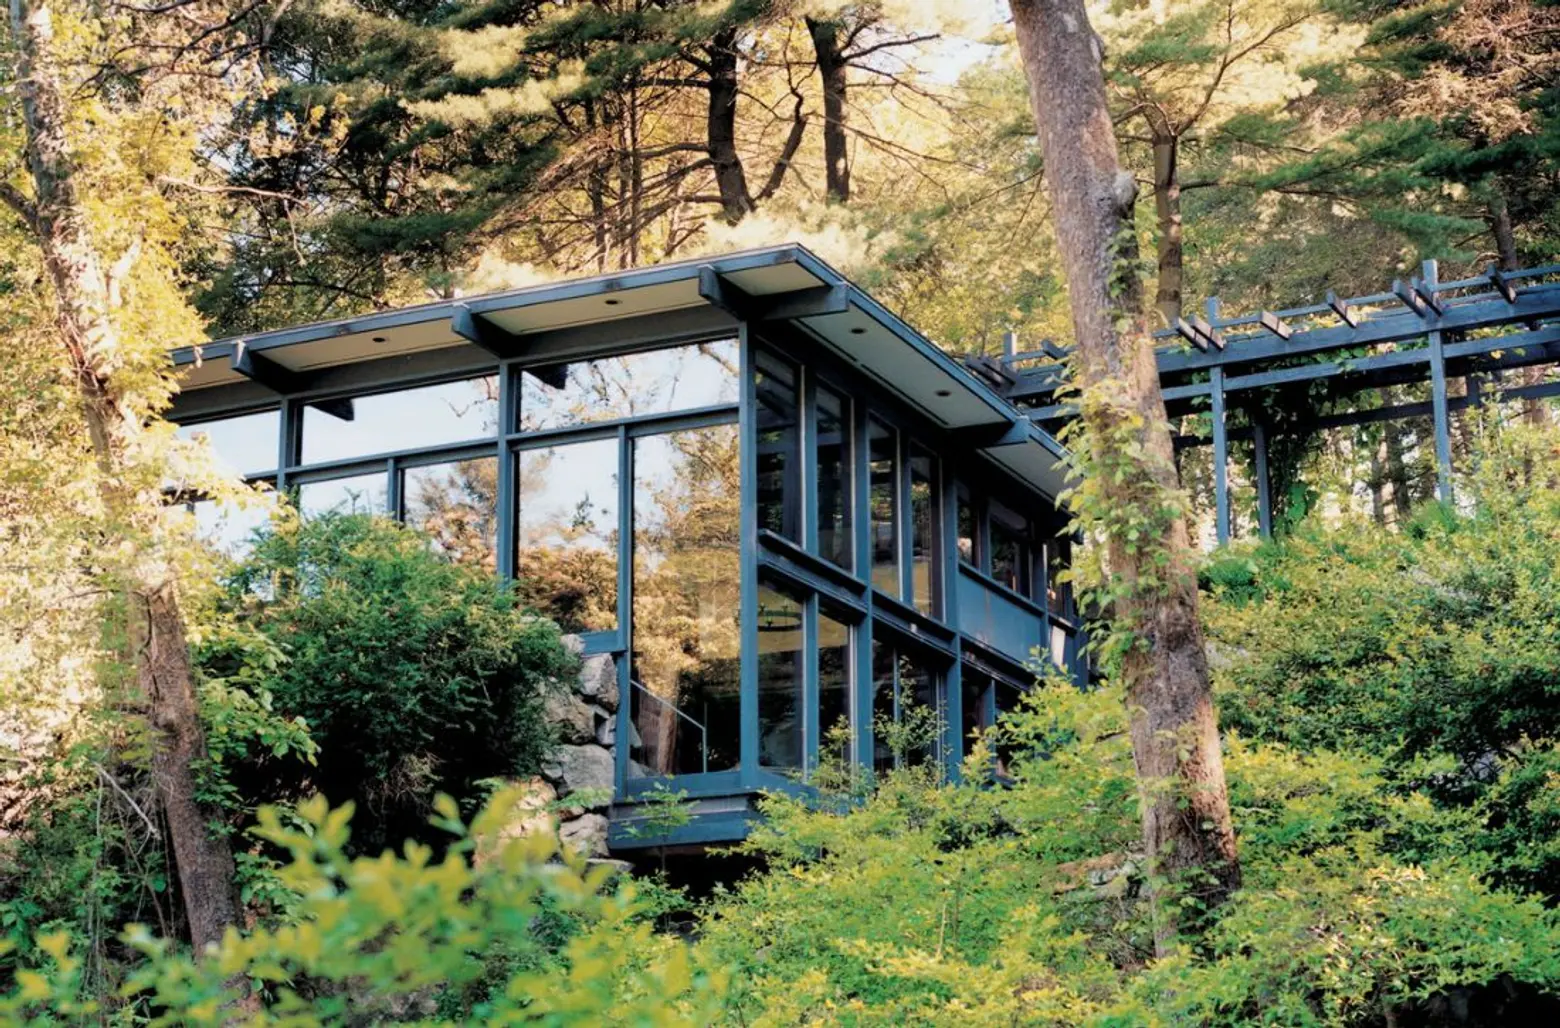 manitoga, Garrison NY, Russel Wright, mid-century modern homes, 